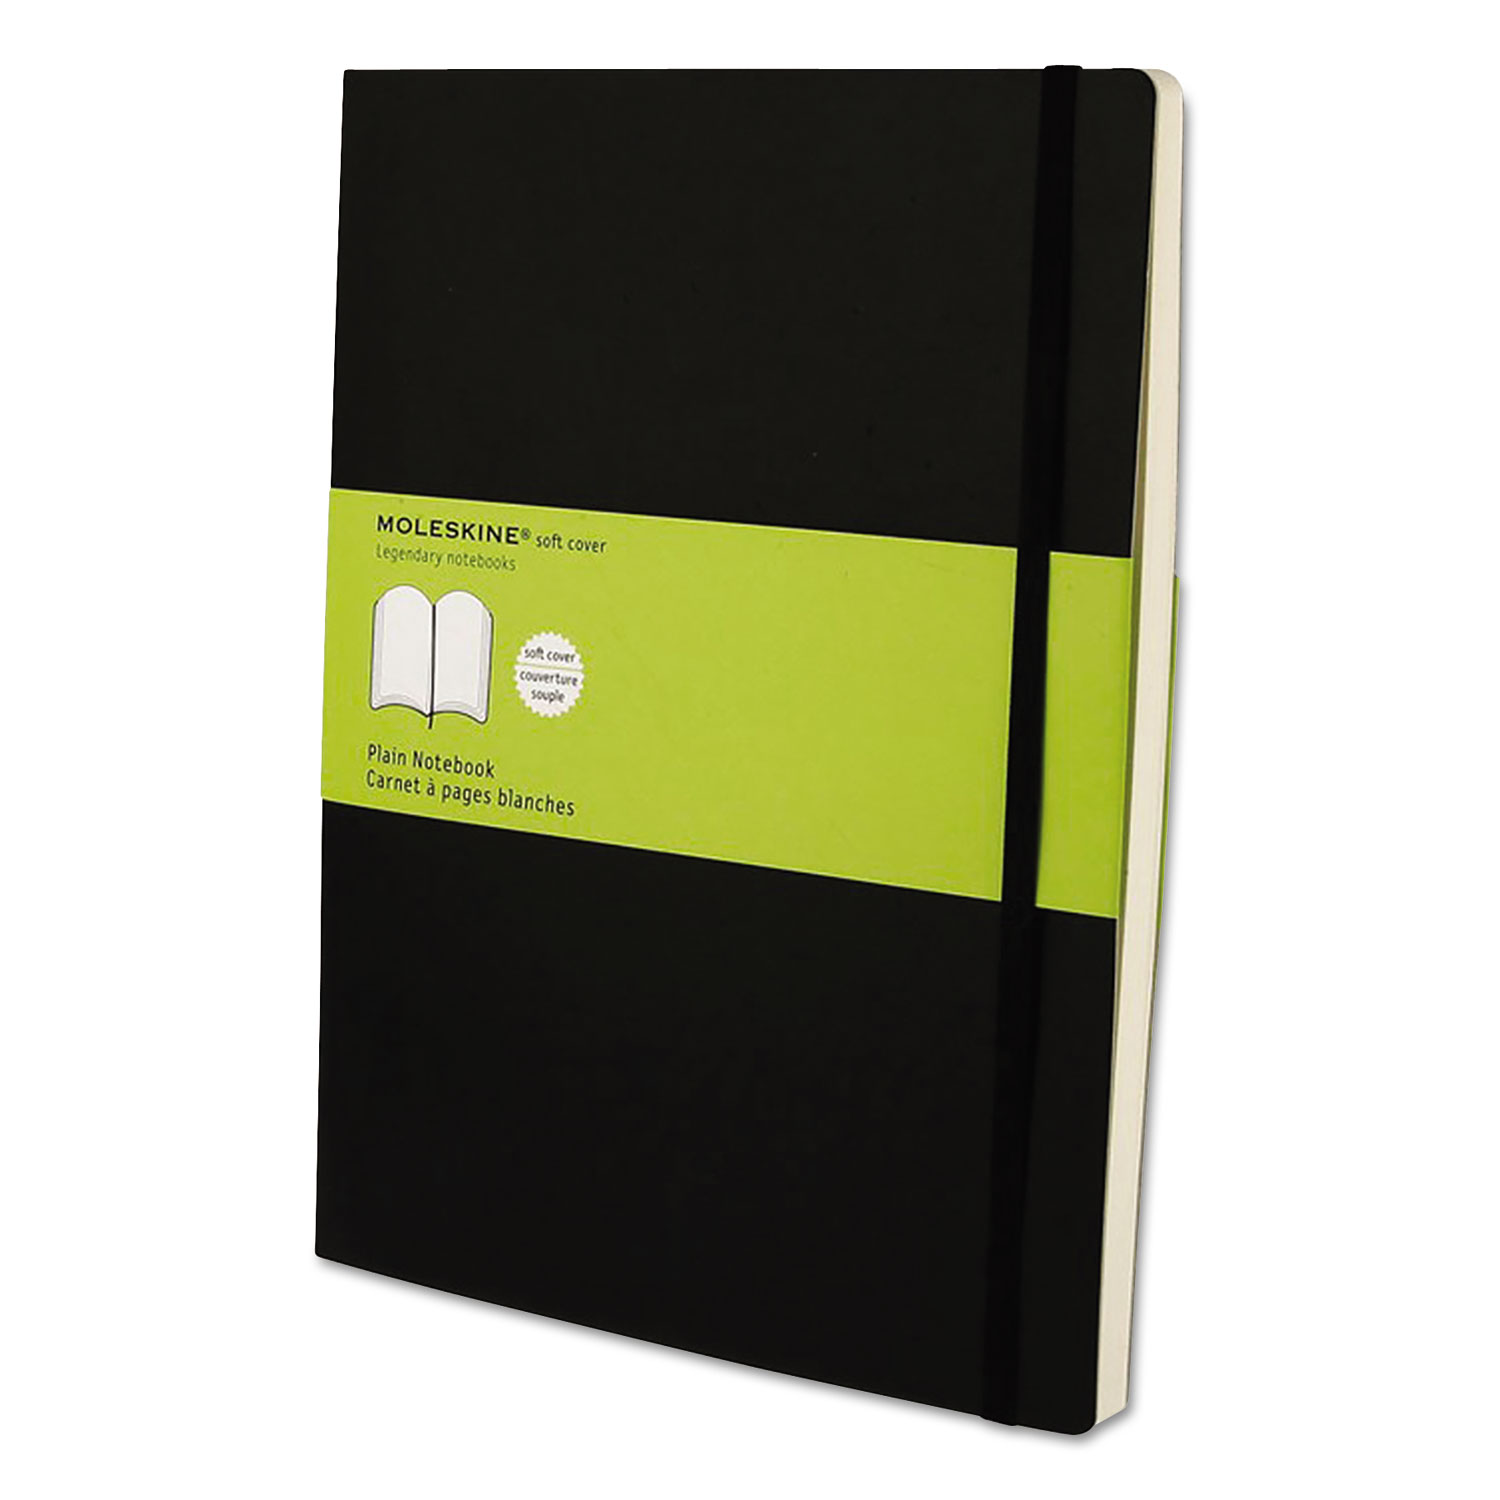  Moleskine 9788883707261 Classic Softcover Notebook, 1 Subject, Unruled, Black Cover, 10 x 7.5, 192 Sheets (HBGMSX17) 